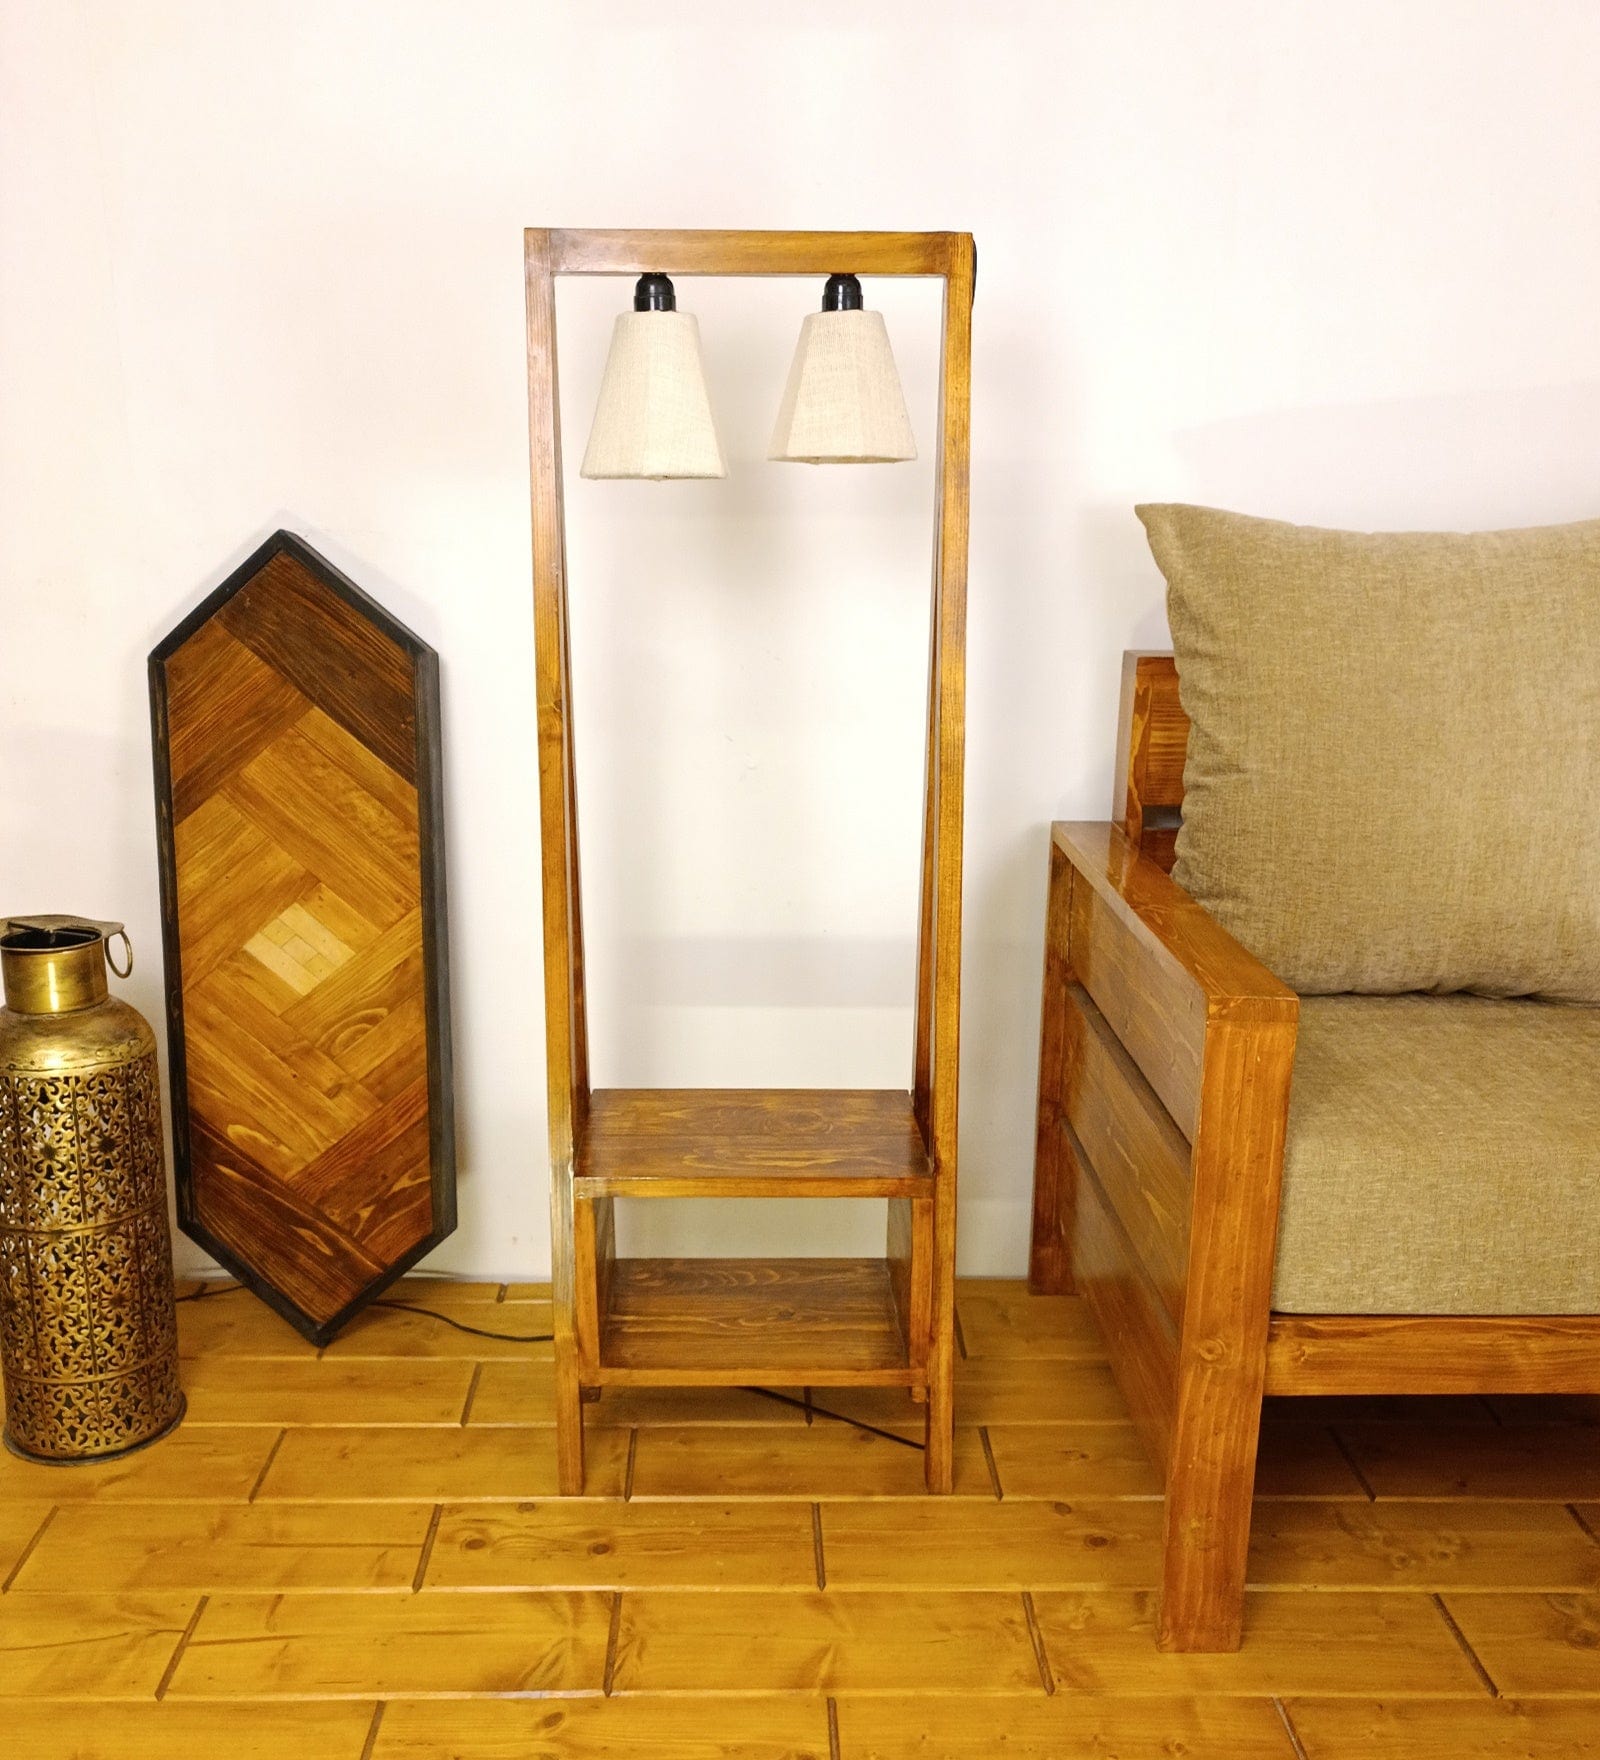 Francis Wooden Floor Lamp with Brown Base and Jute Fabric Lampshade (BULB NOT INCLUDED)